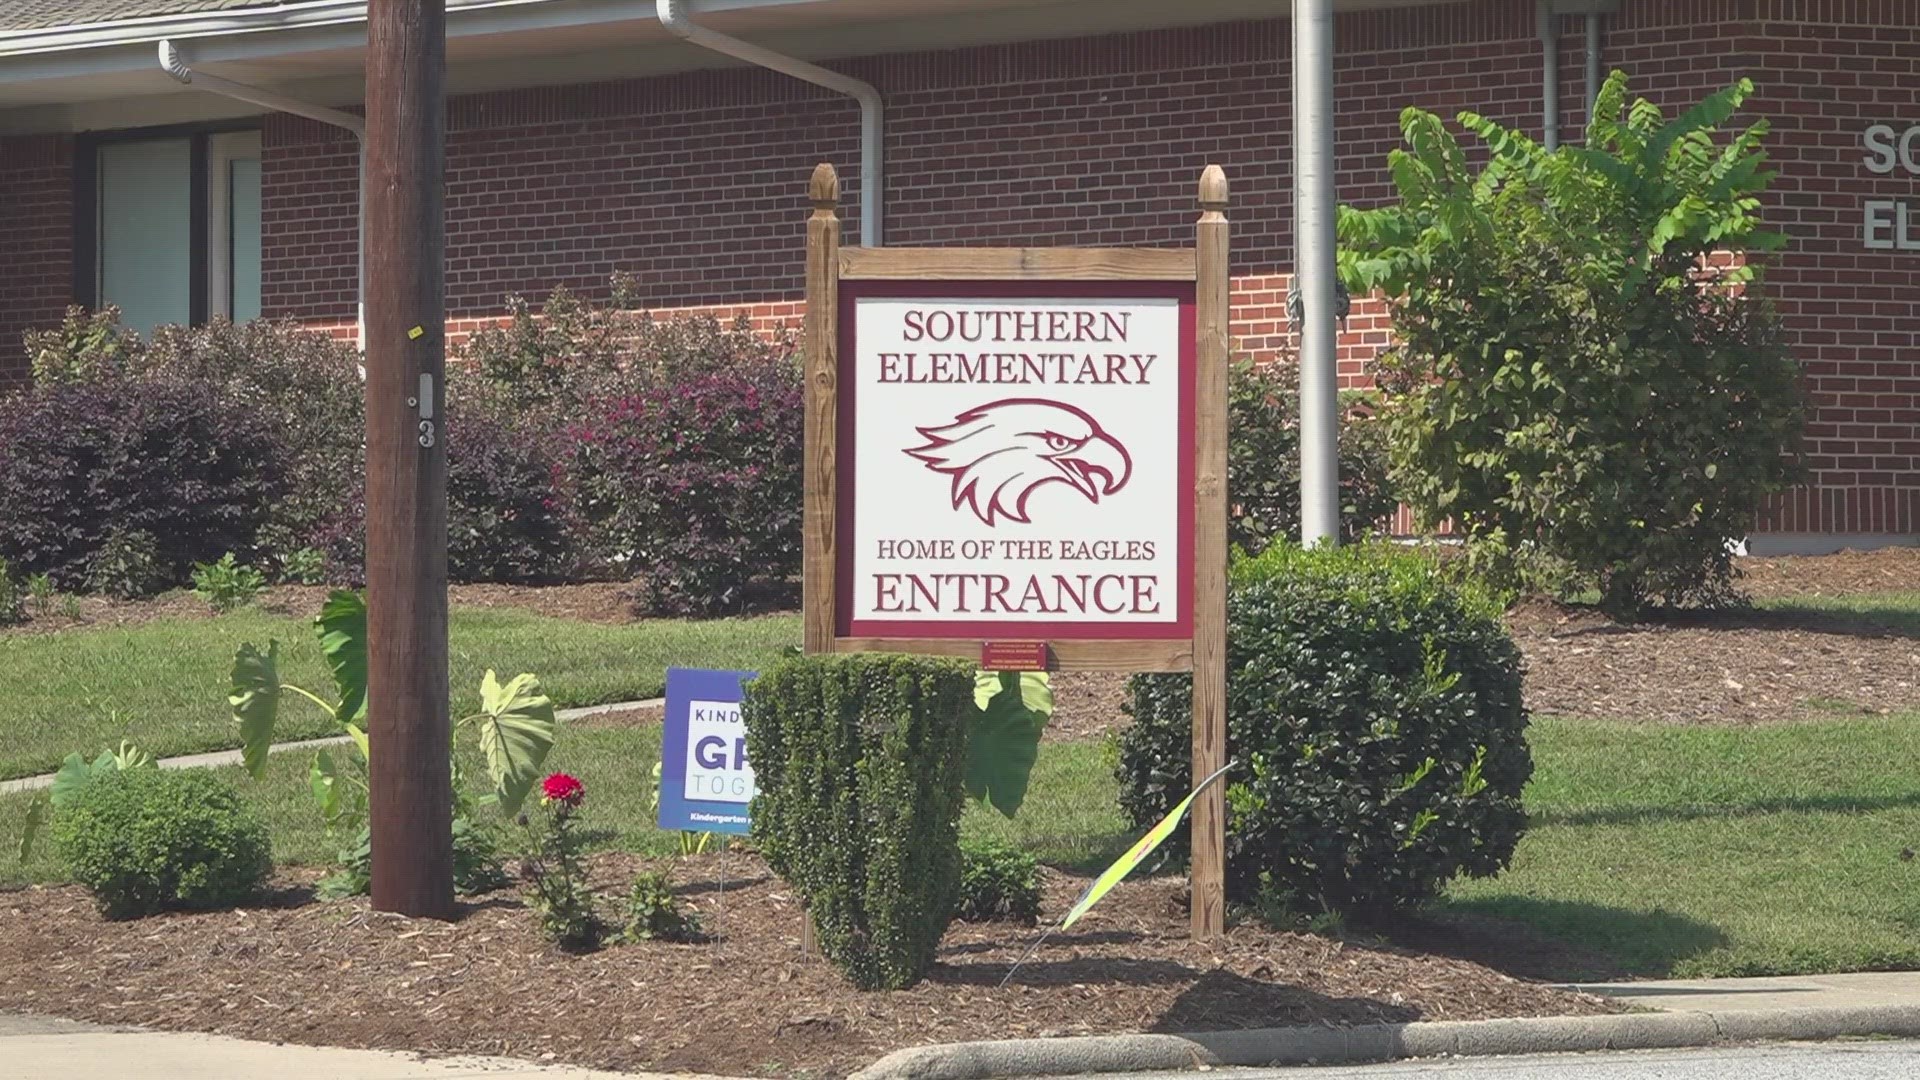 Southern Elementary's principal sent out a message last week saying mold was discovered in the media center.